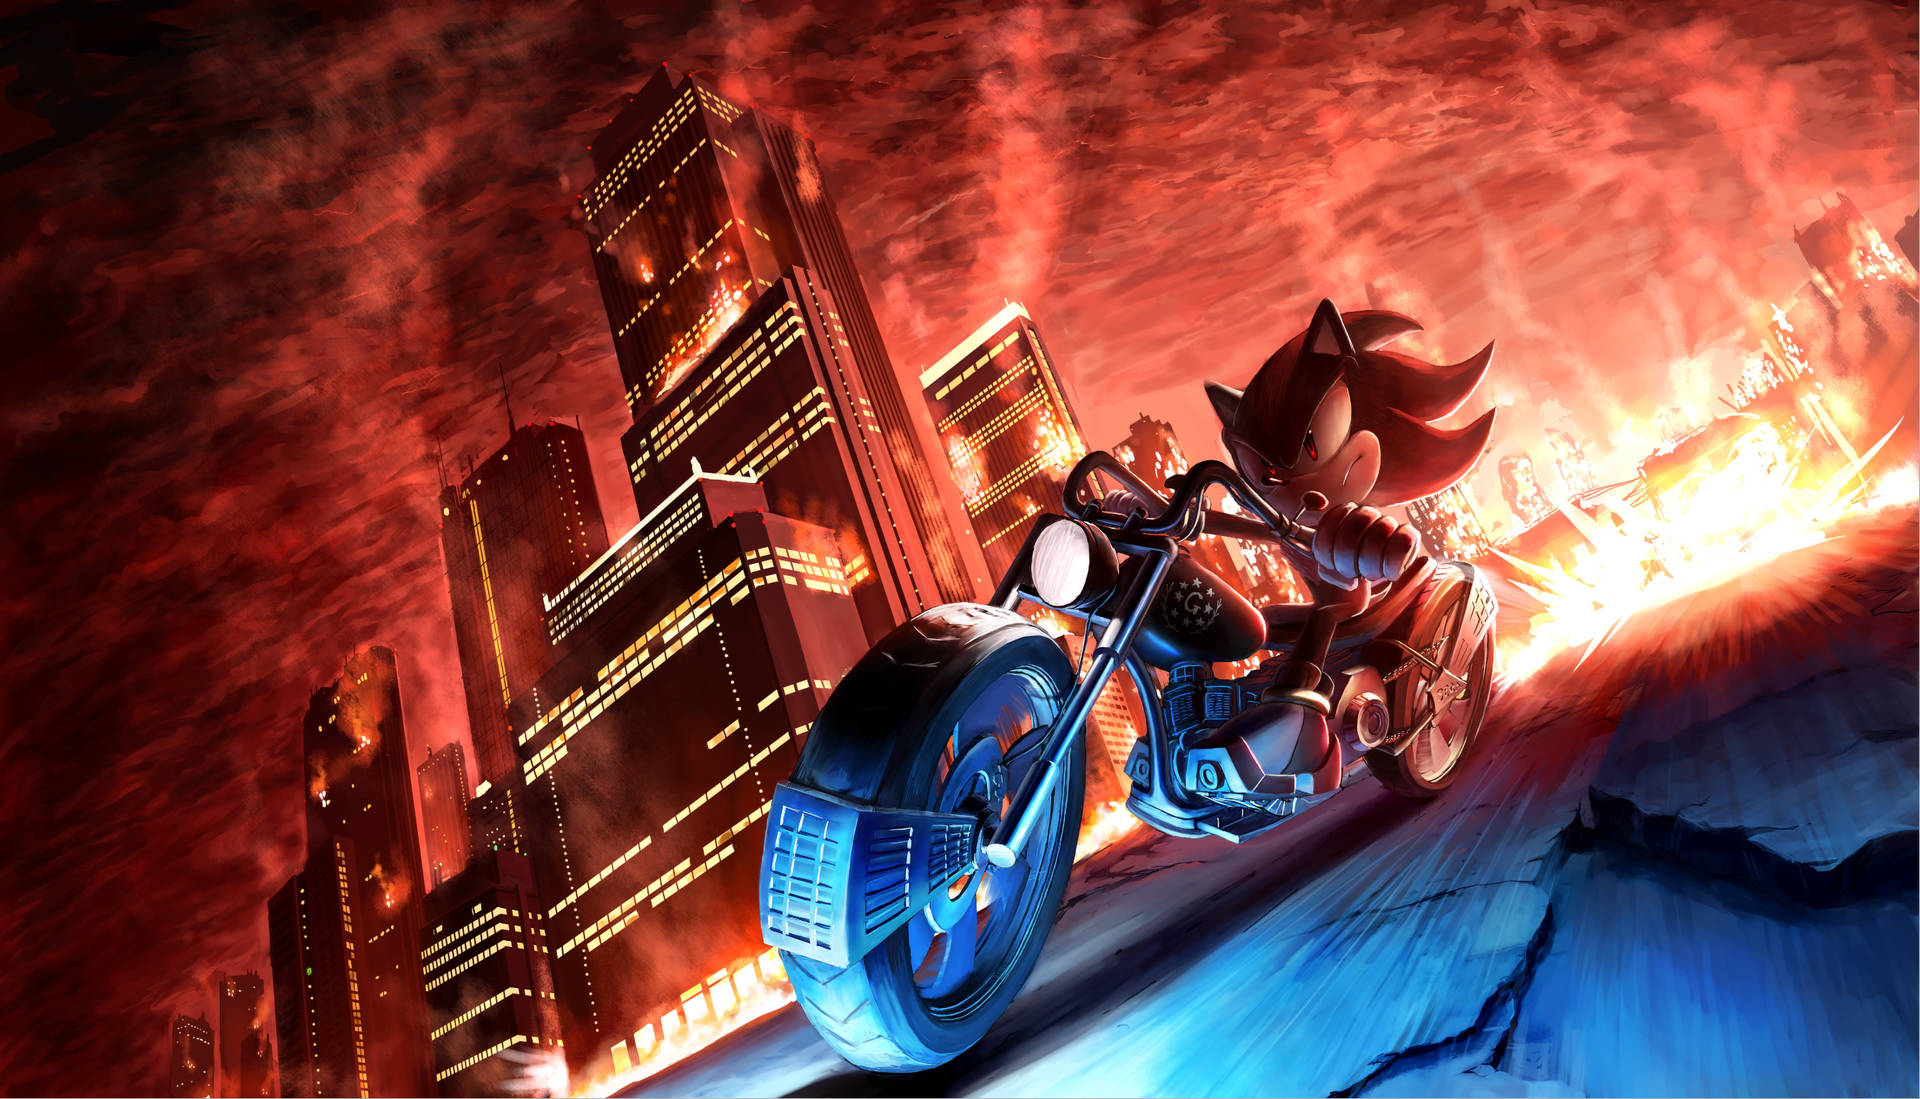 Evil Sonic The Hedgehog Riding A Motorcycle Wallpaper